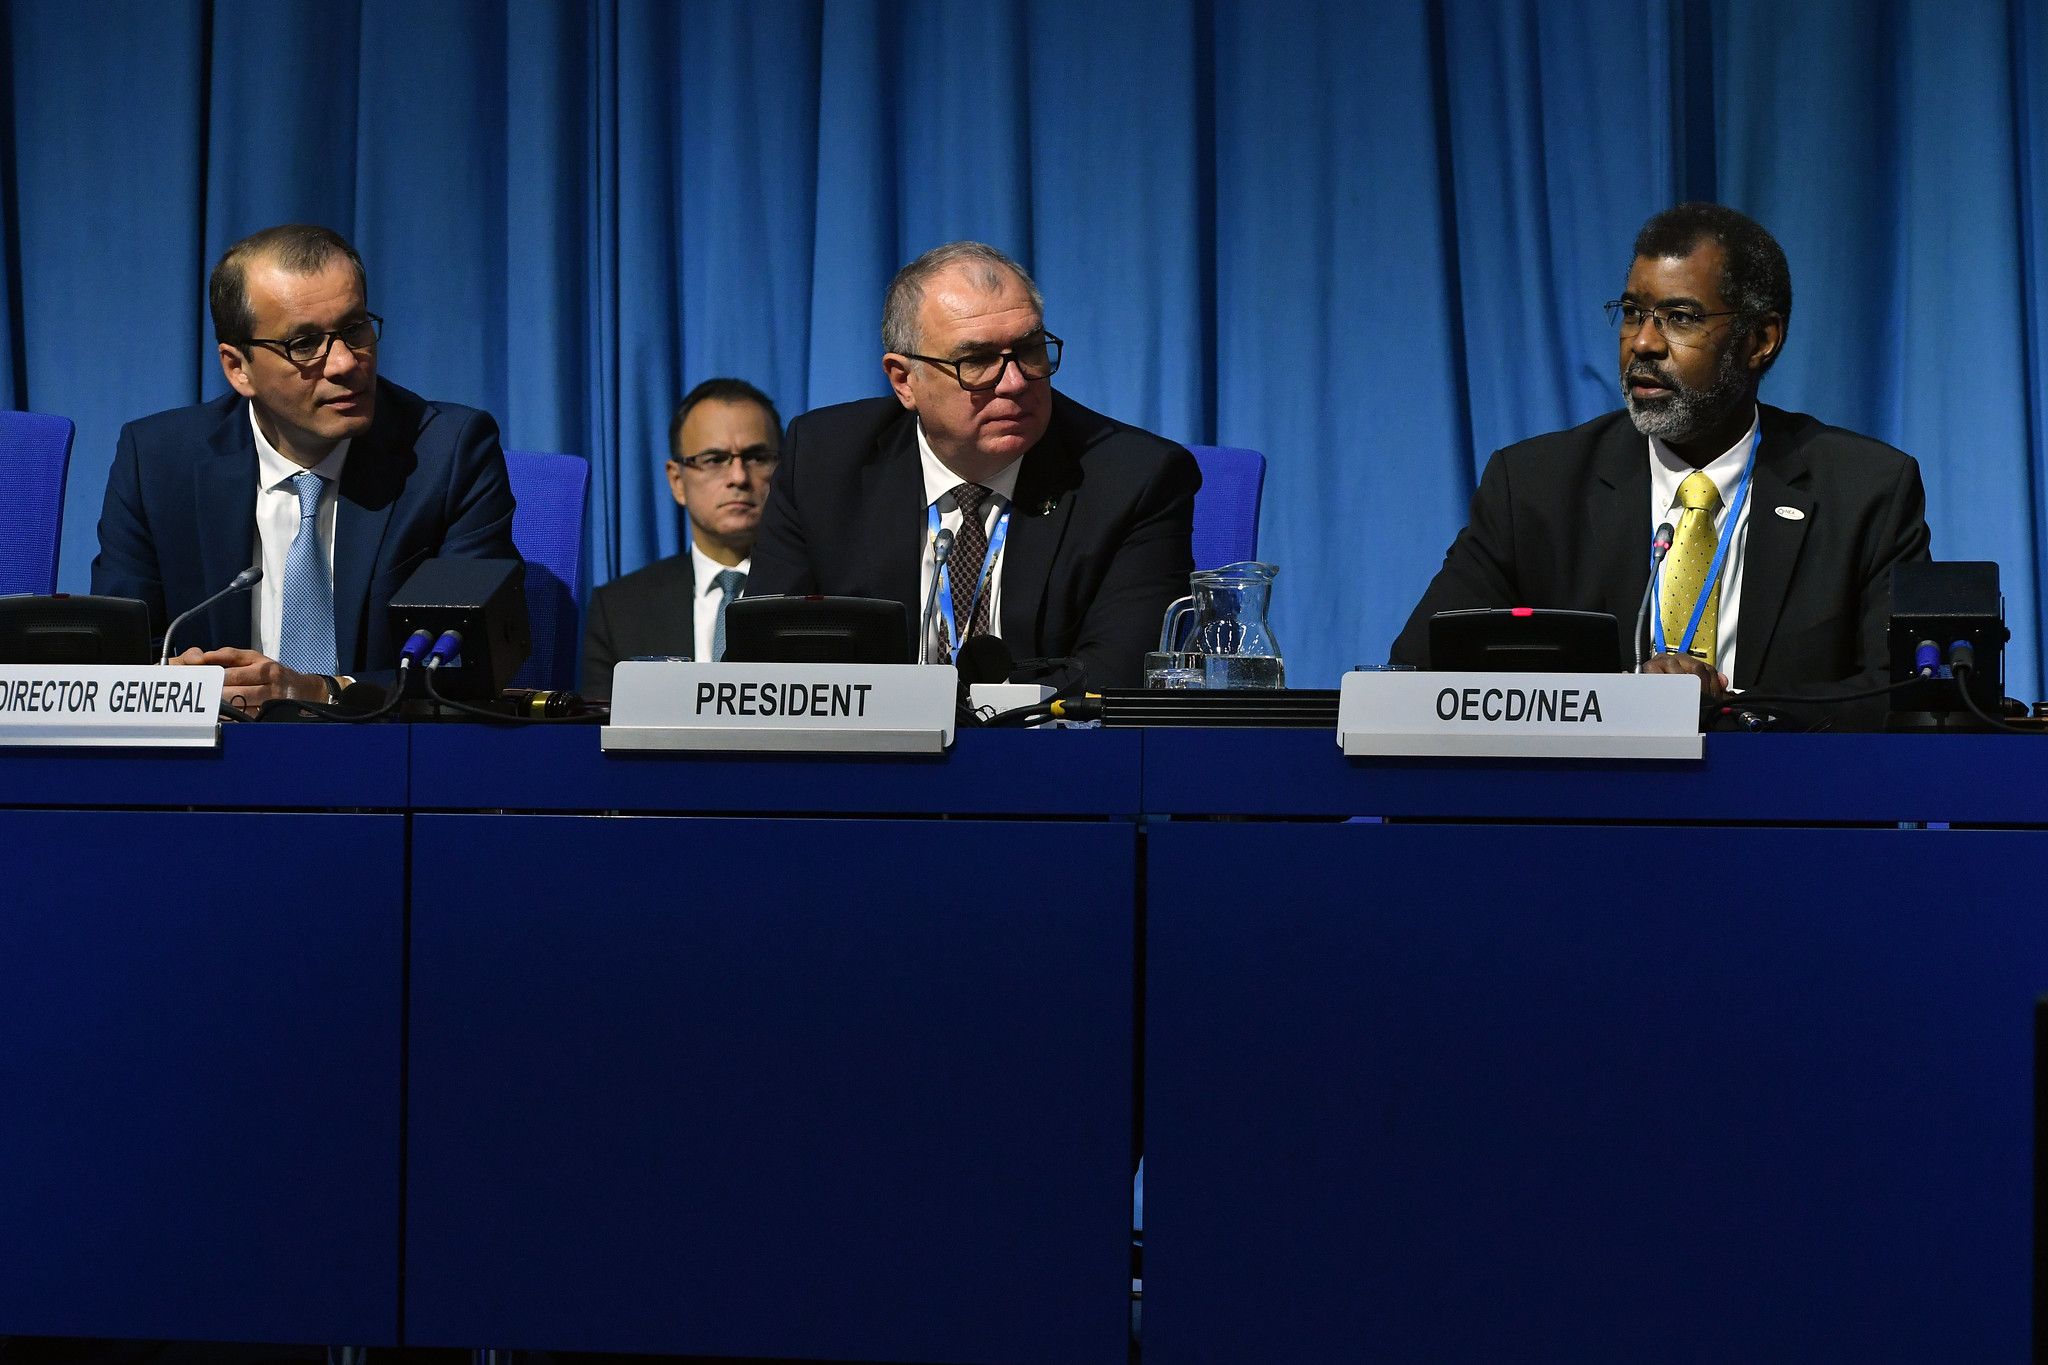 IAEA Releases Concluding Summary of Conference on Climate Change and